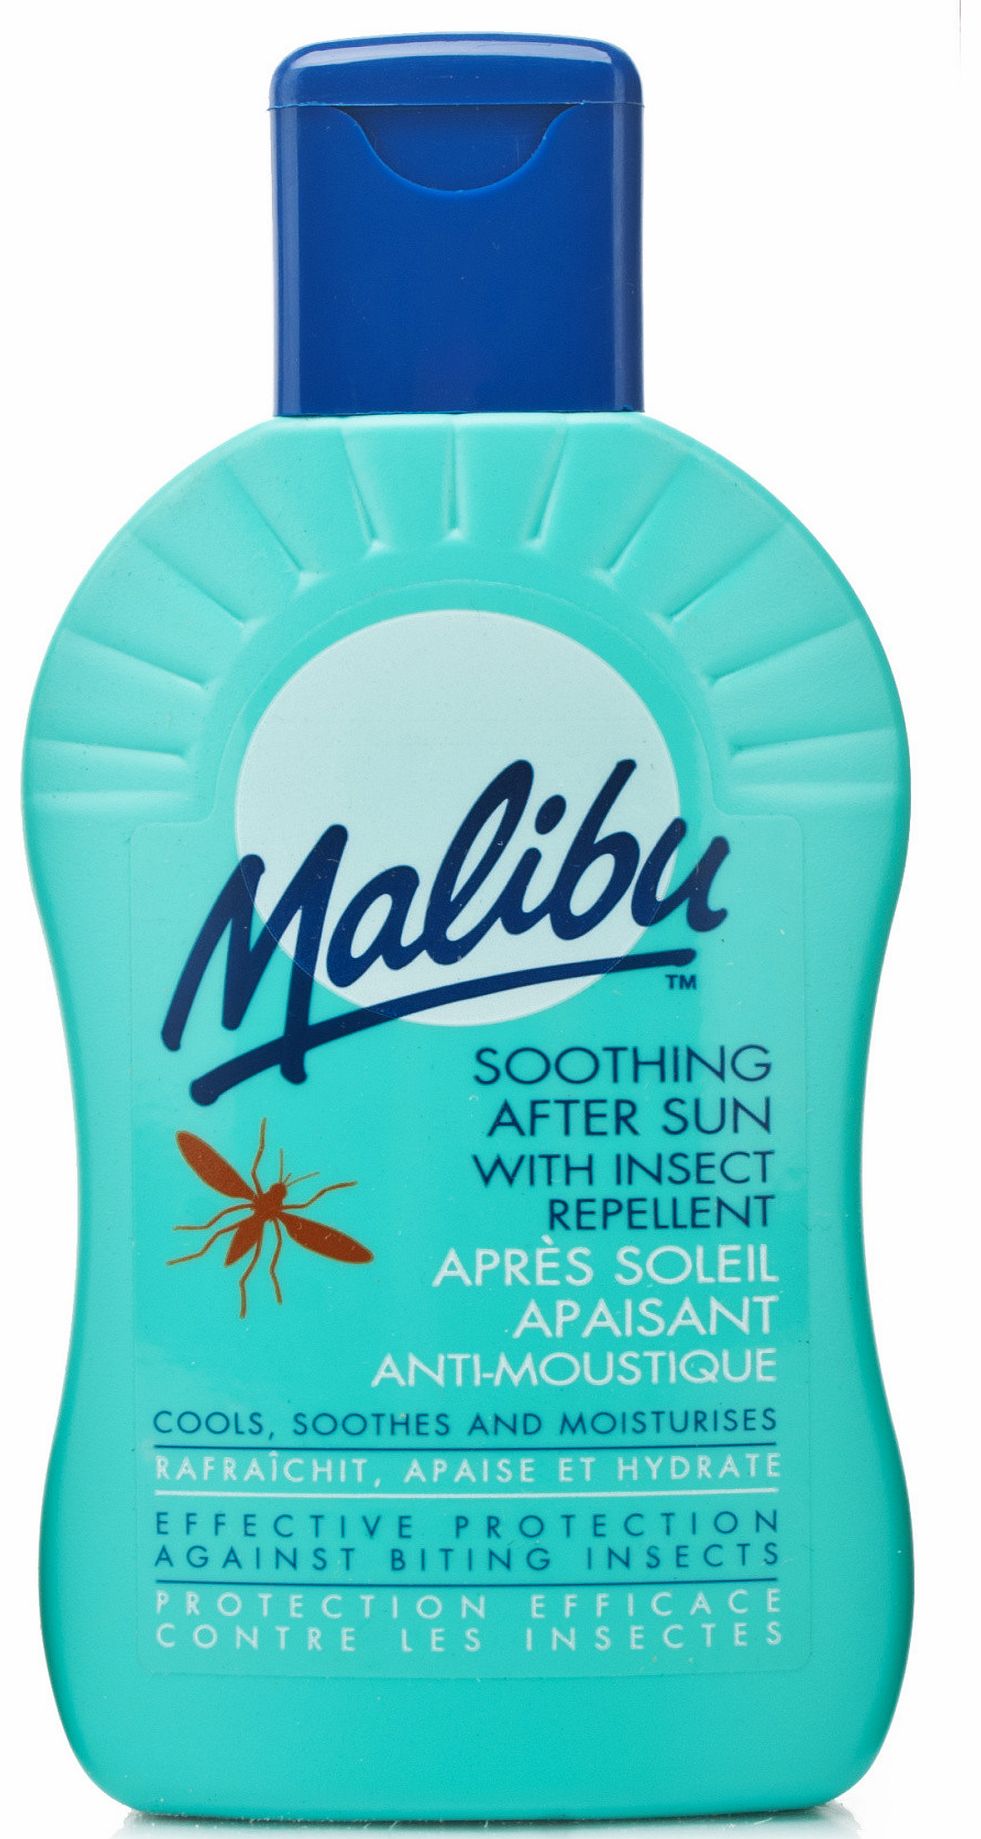 Malibu Aftersun with Insect Repellent